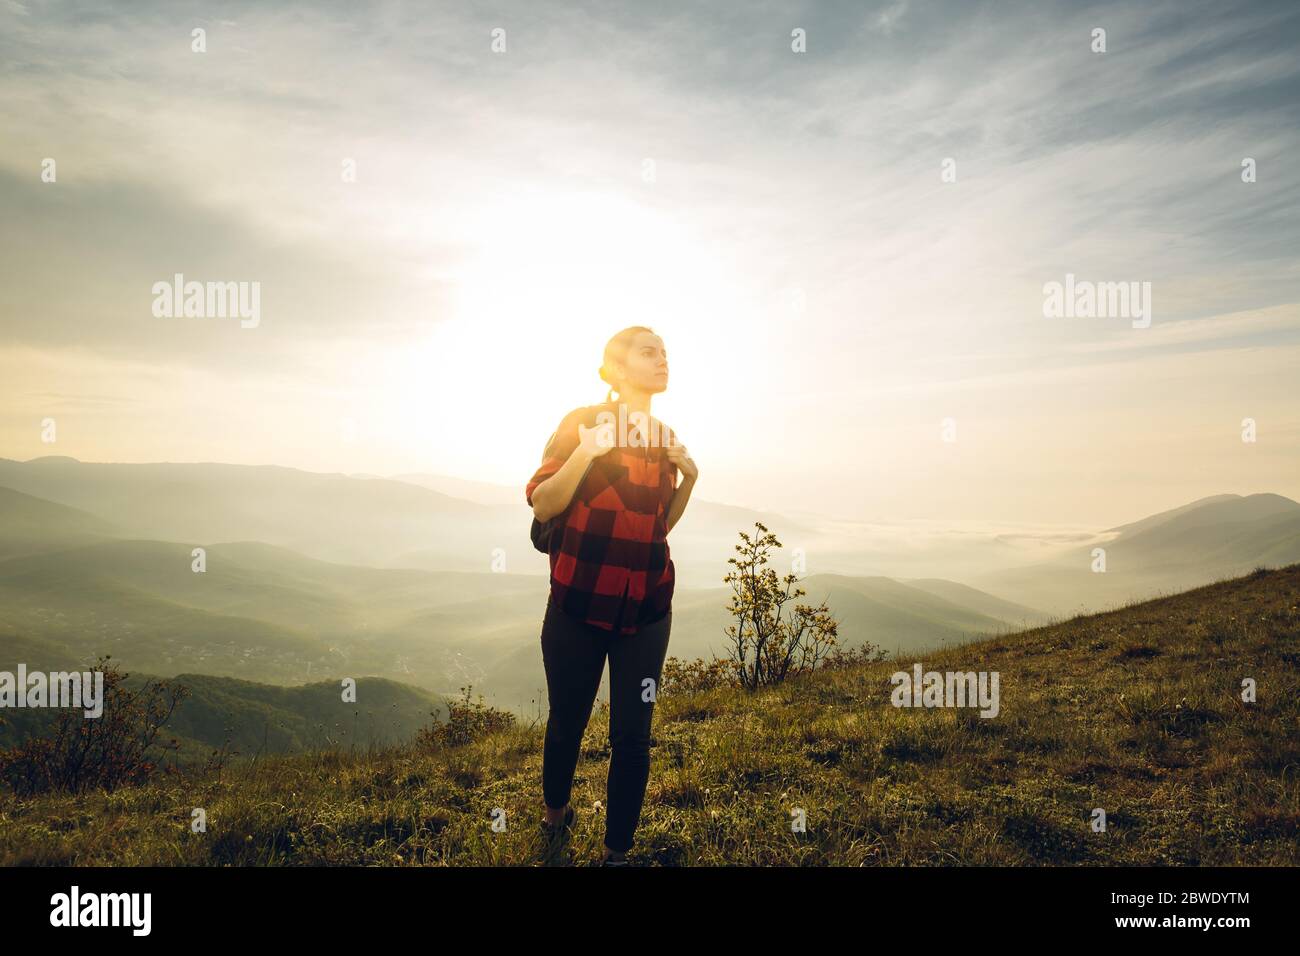 Young Woman Traveler In Red Plaid Shirt With Backpack Climbs Uphill At Sunrise. Scout Travel Adventure Concept Stock Photo